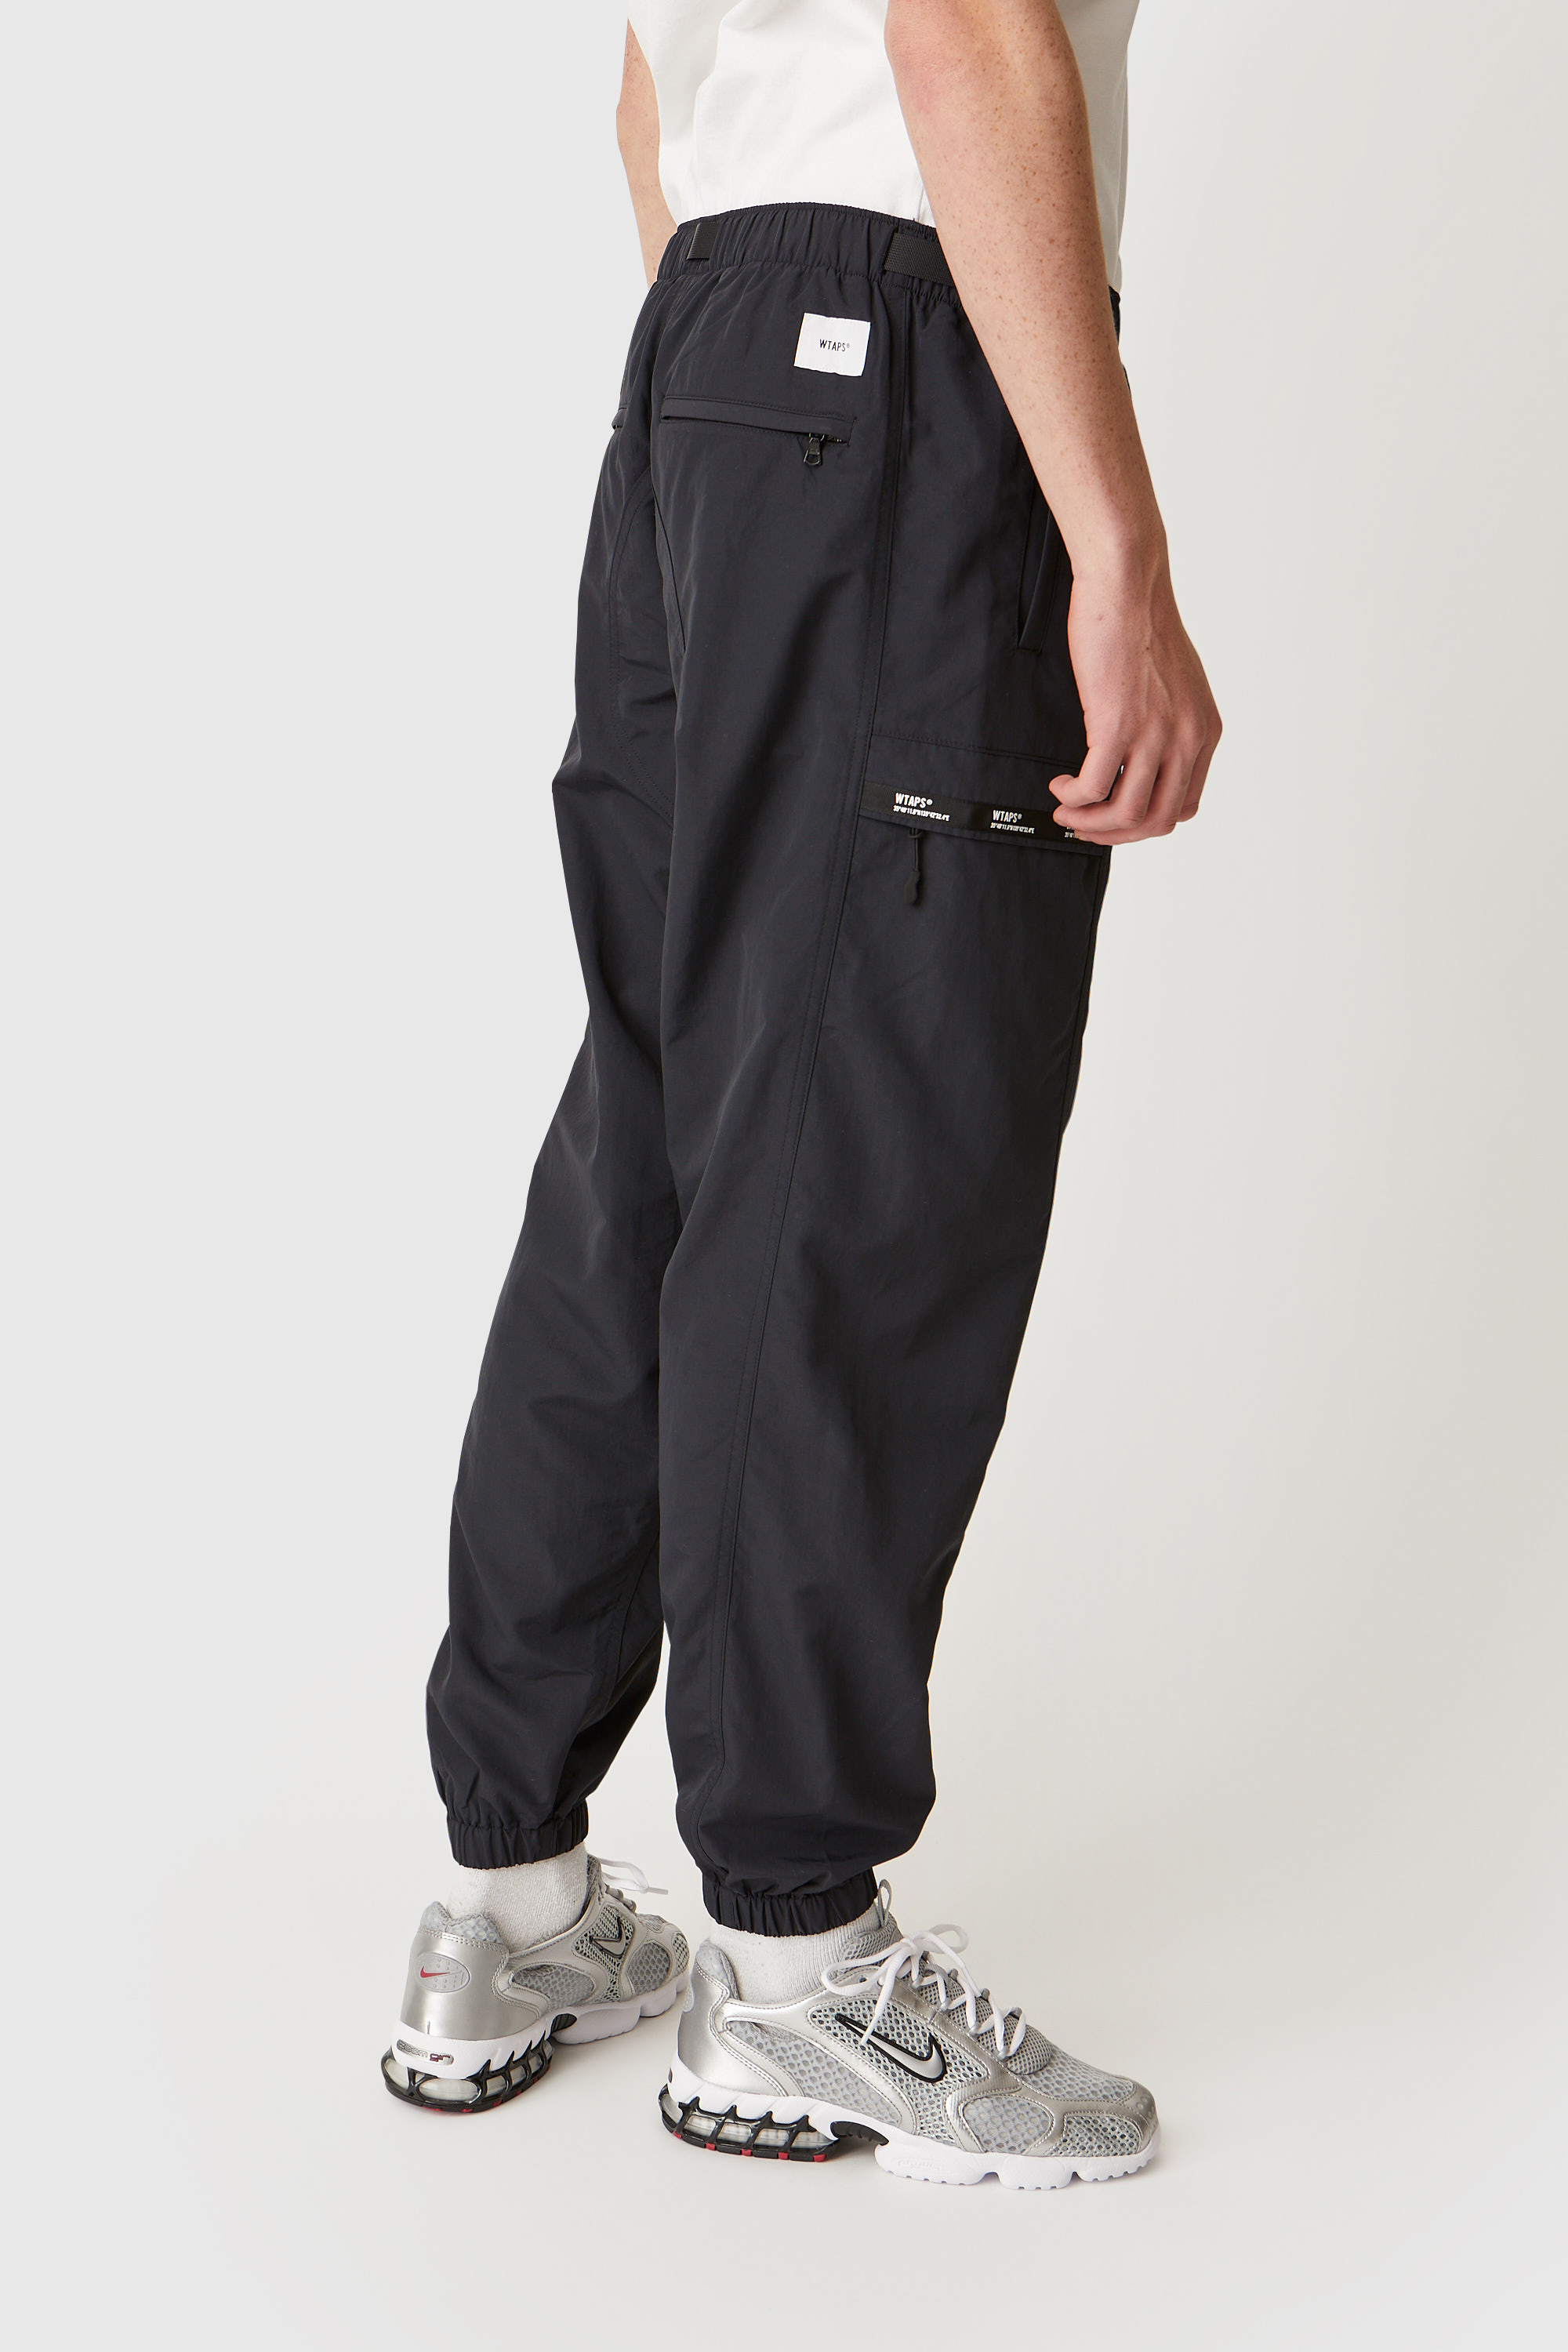 23SS WTAPS TRACKS TROUSERS POLY. TWILL | www.innoveering.net